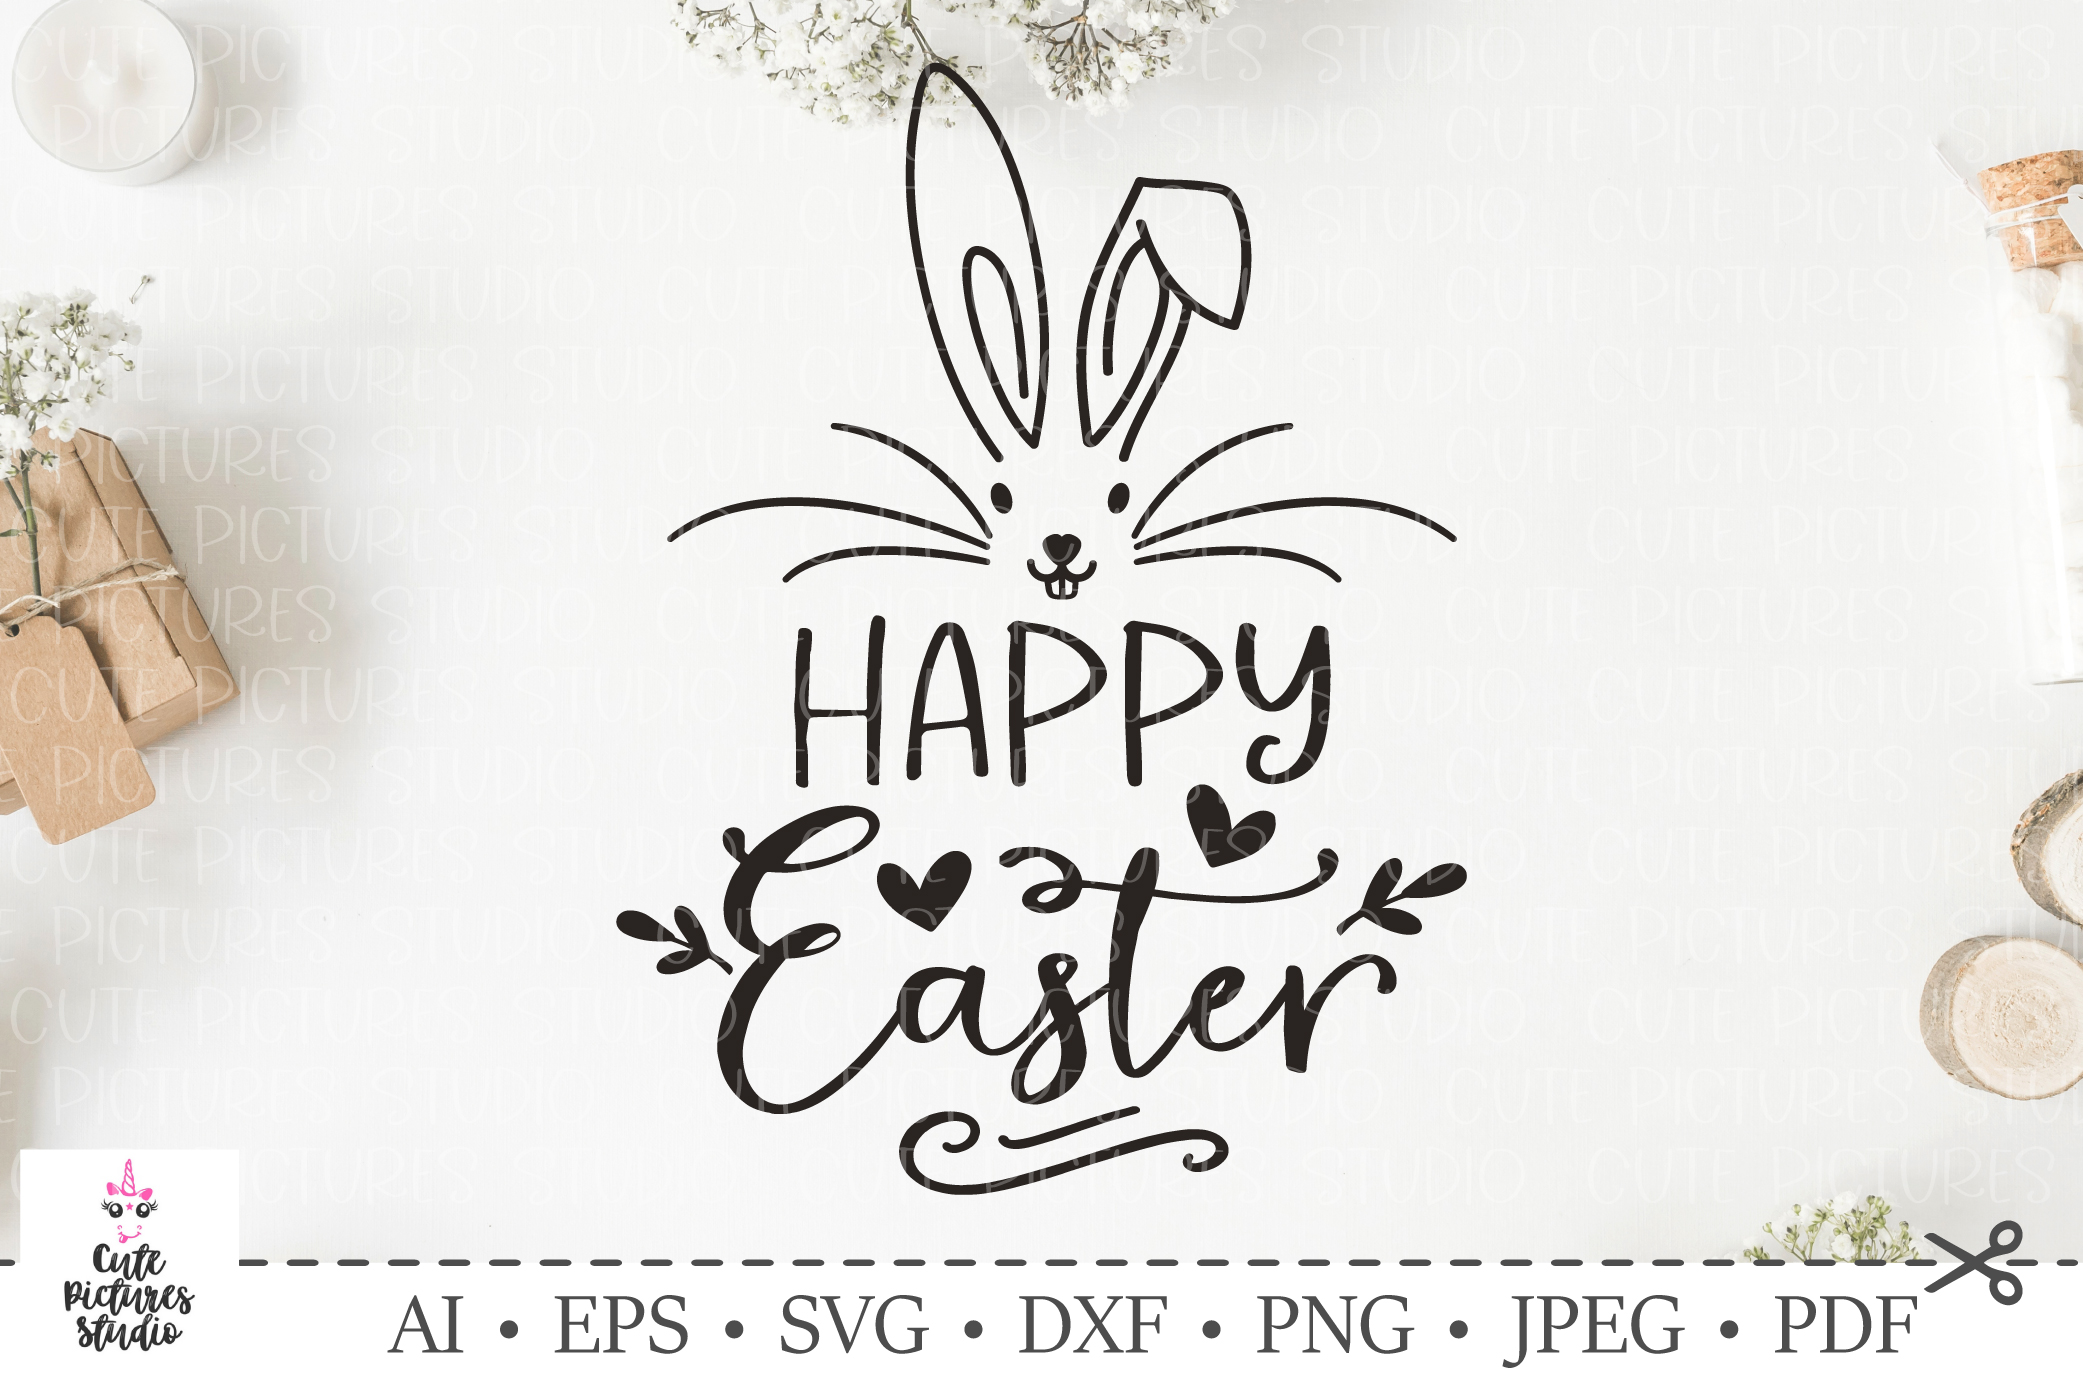 Happy Easter Bunny Svg - 346+ Crafter Files